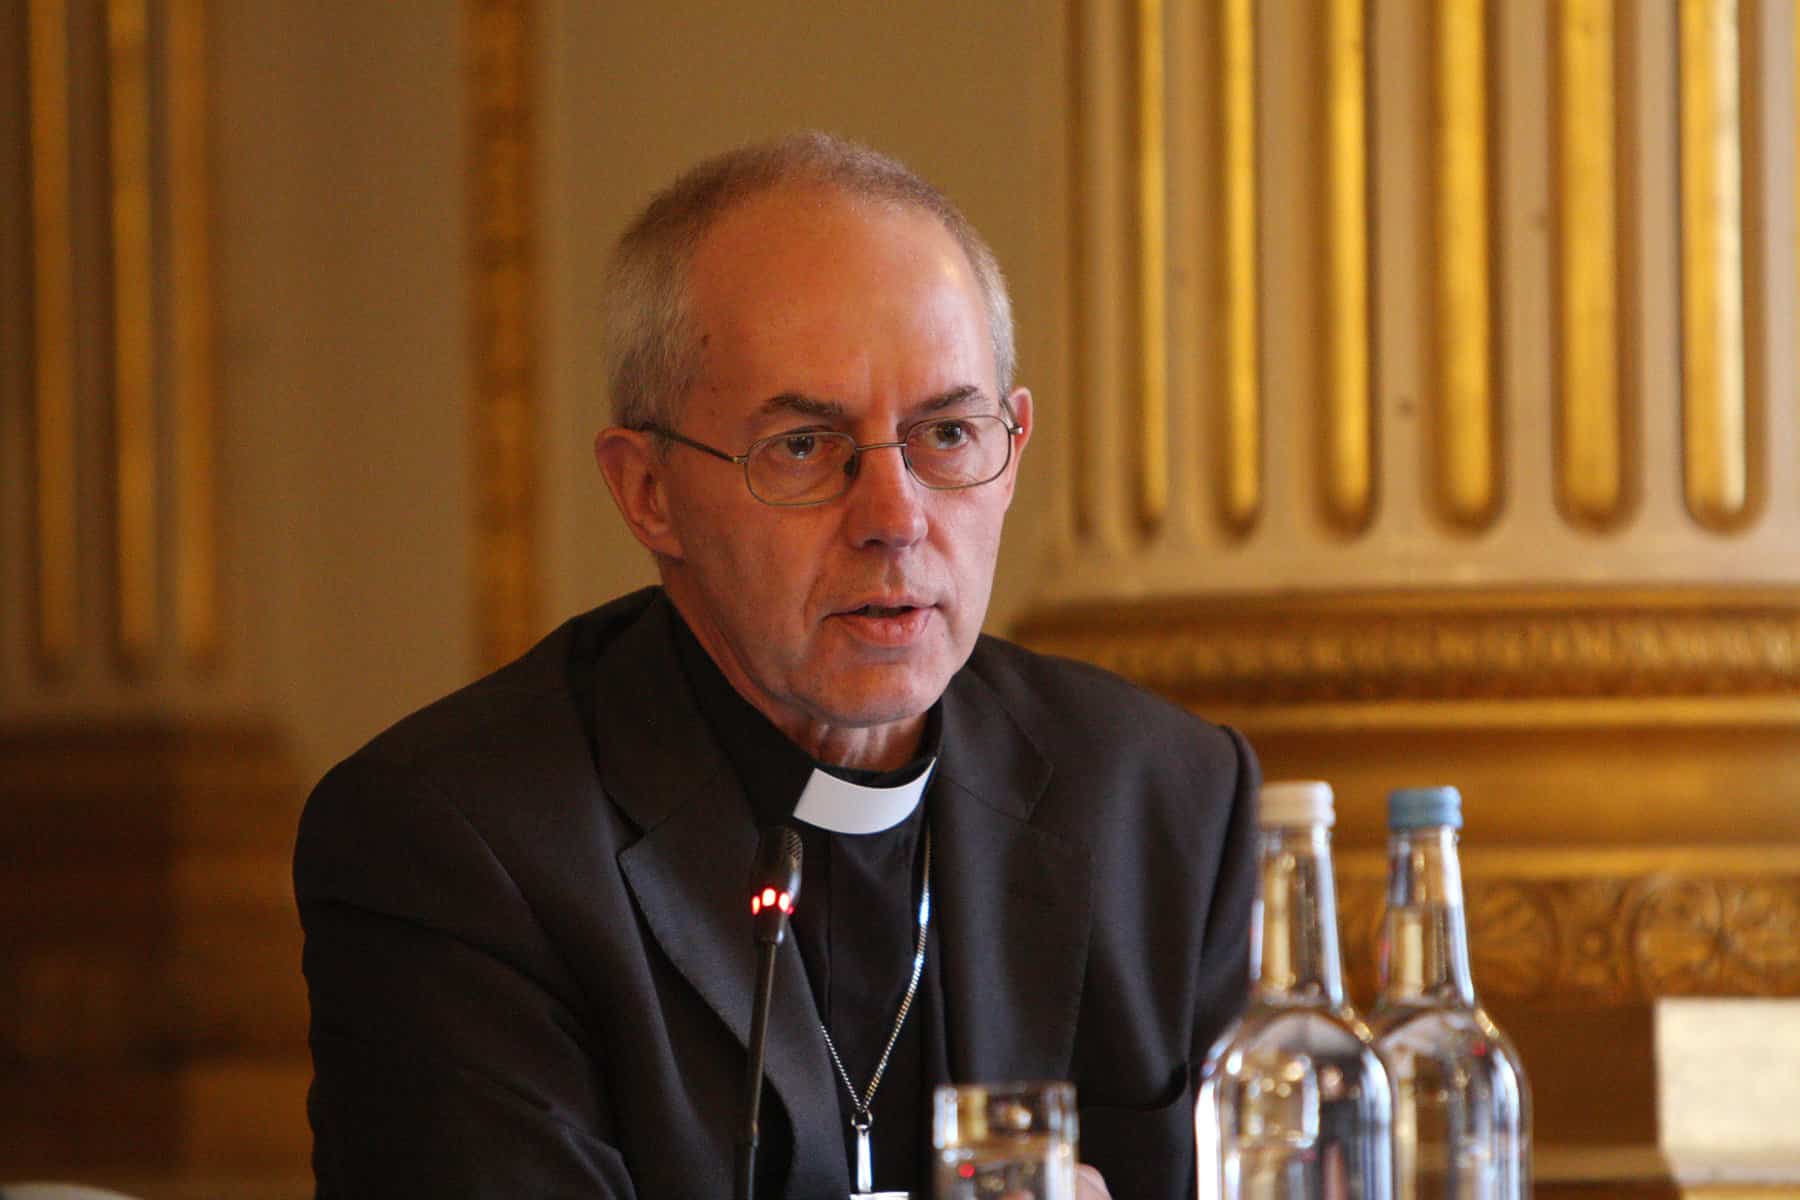 Archbishop Justin Welby sits at a table in clerical vestments.